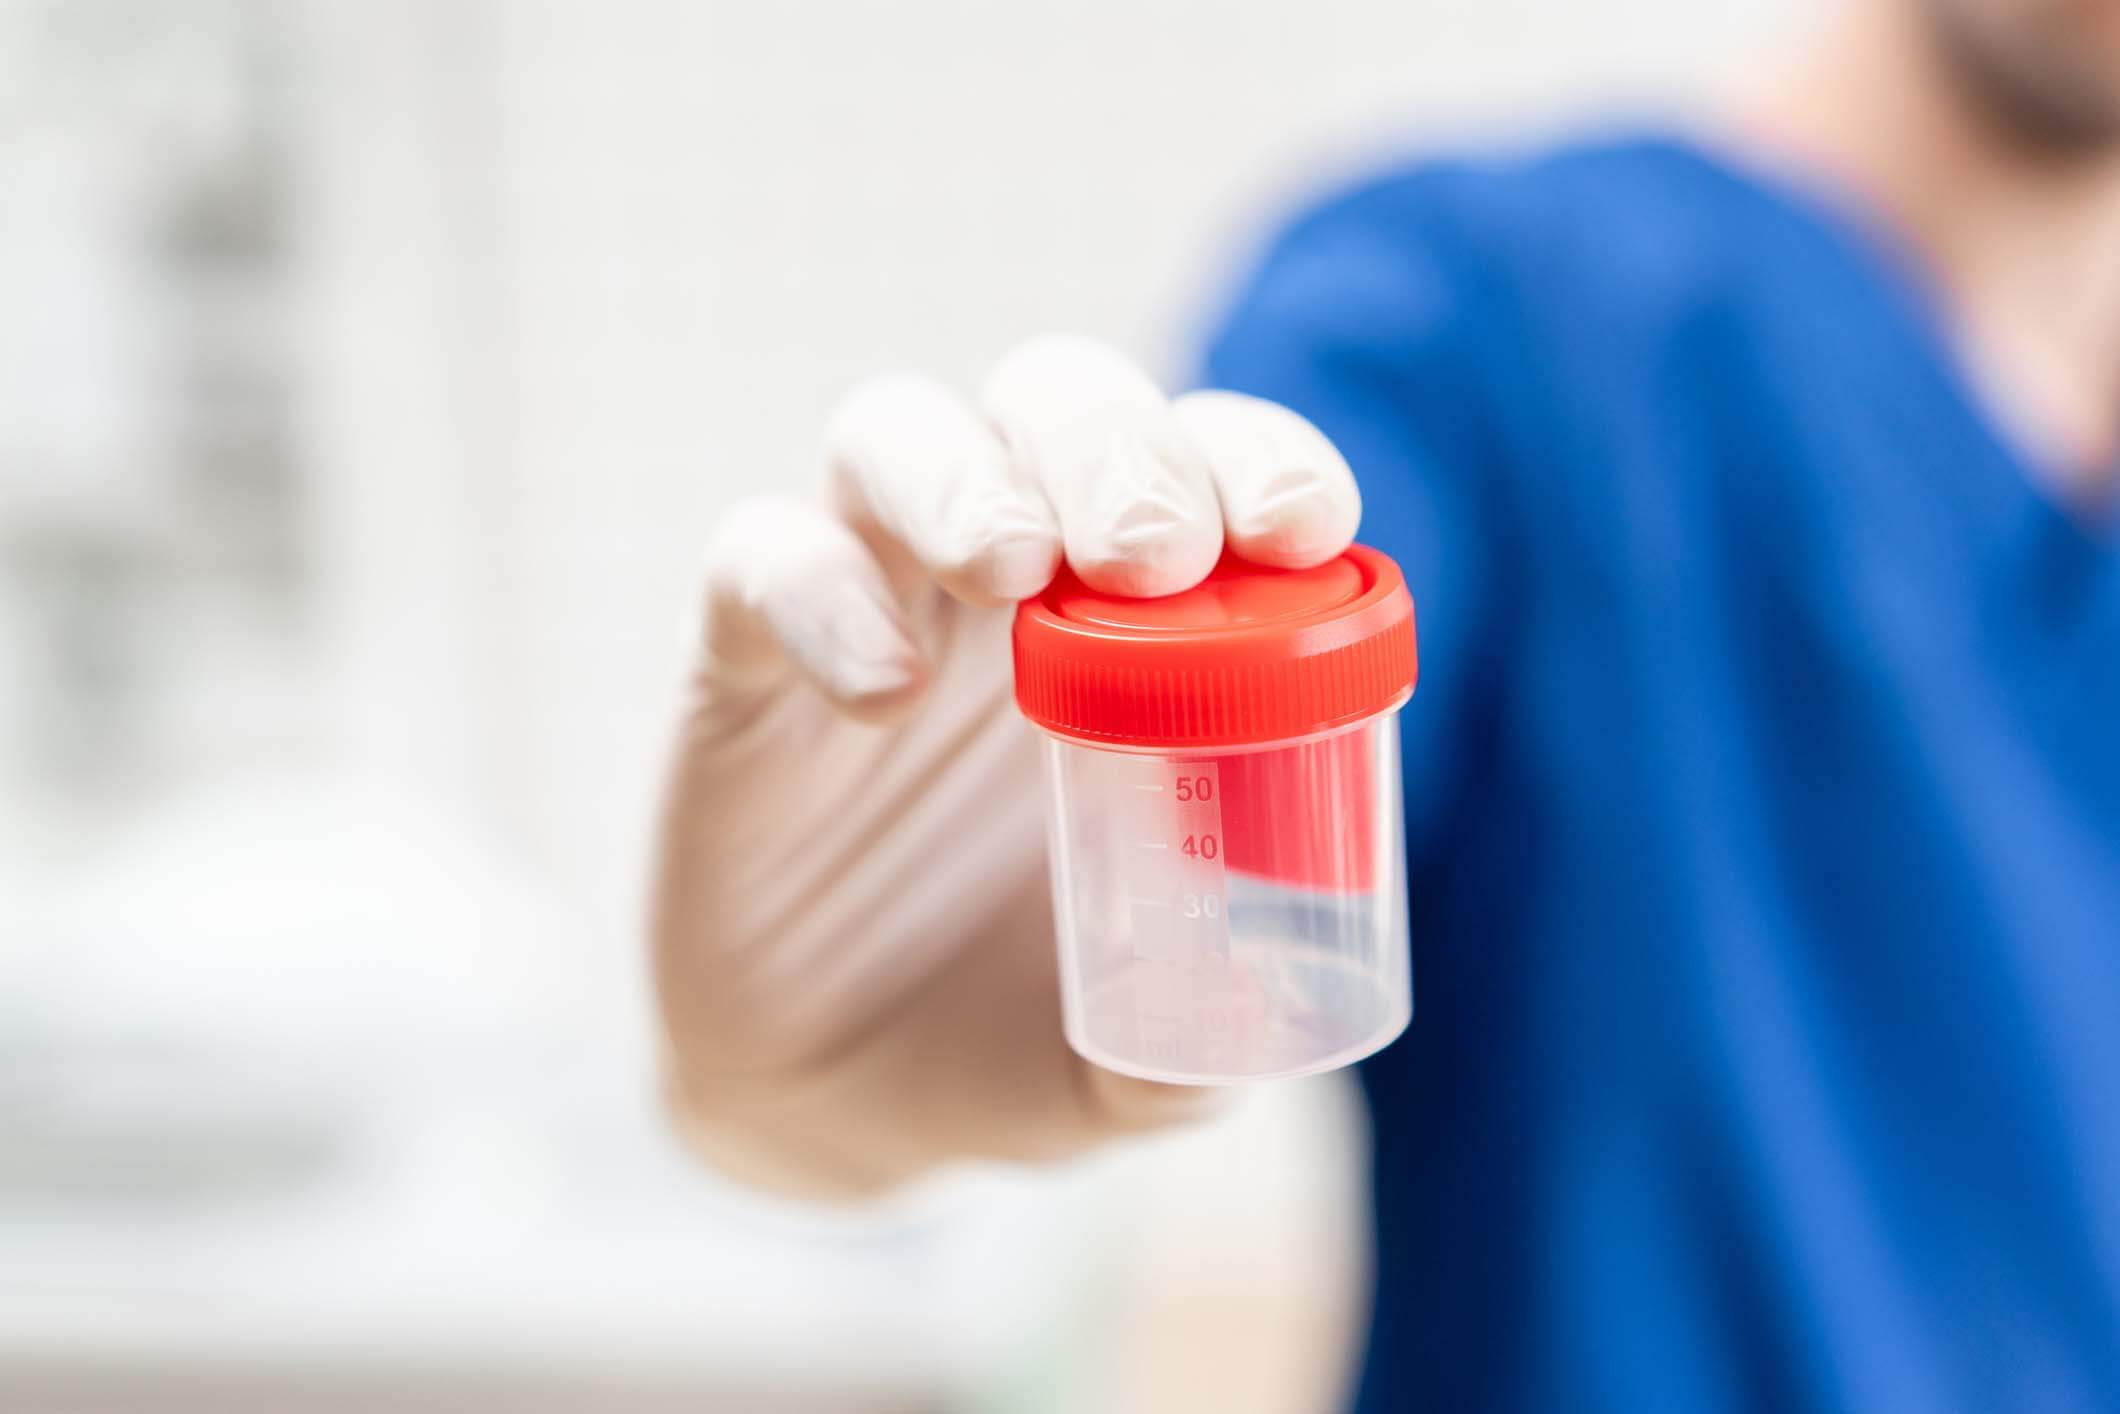 Safework Health provides urine drug testing in the workplace;